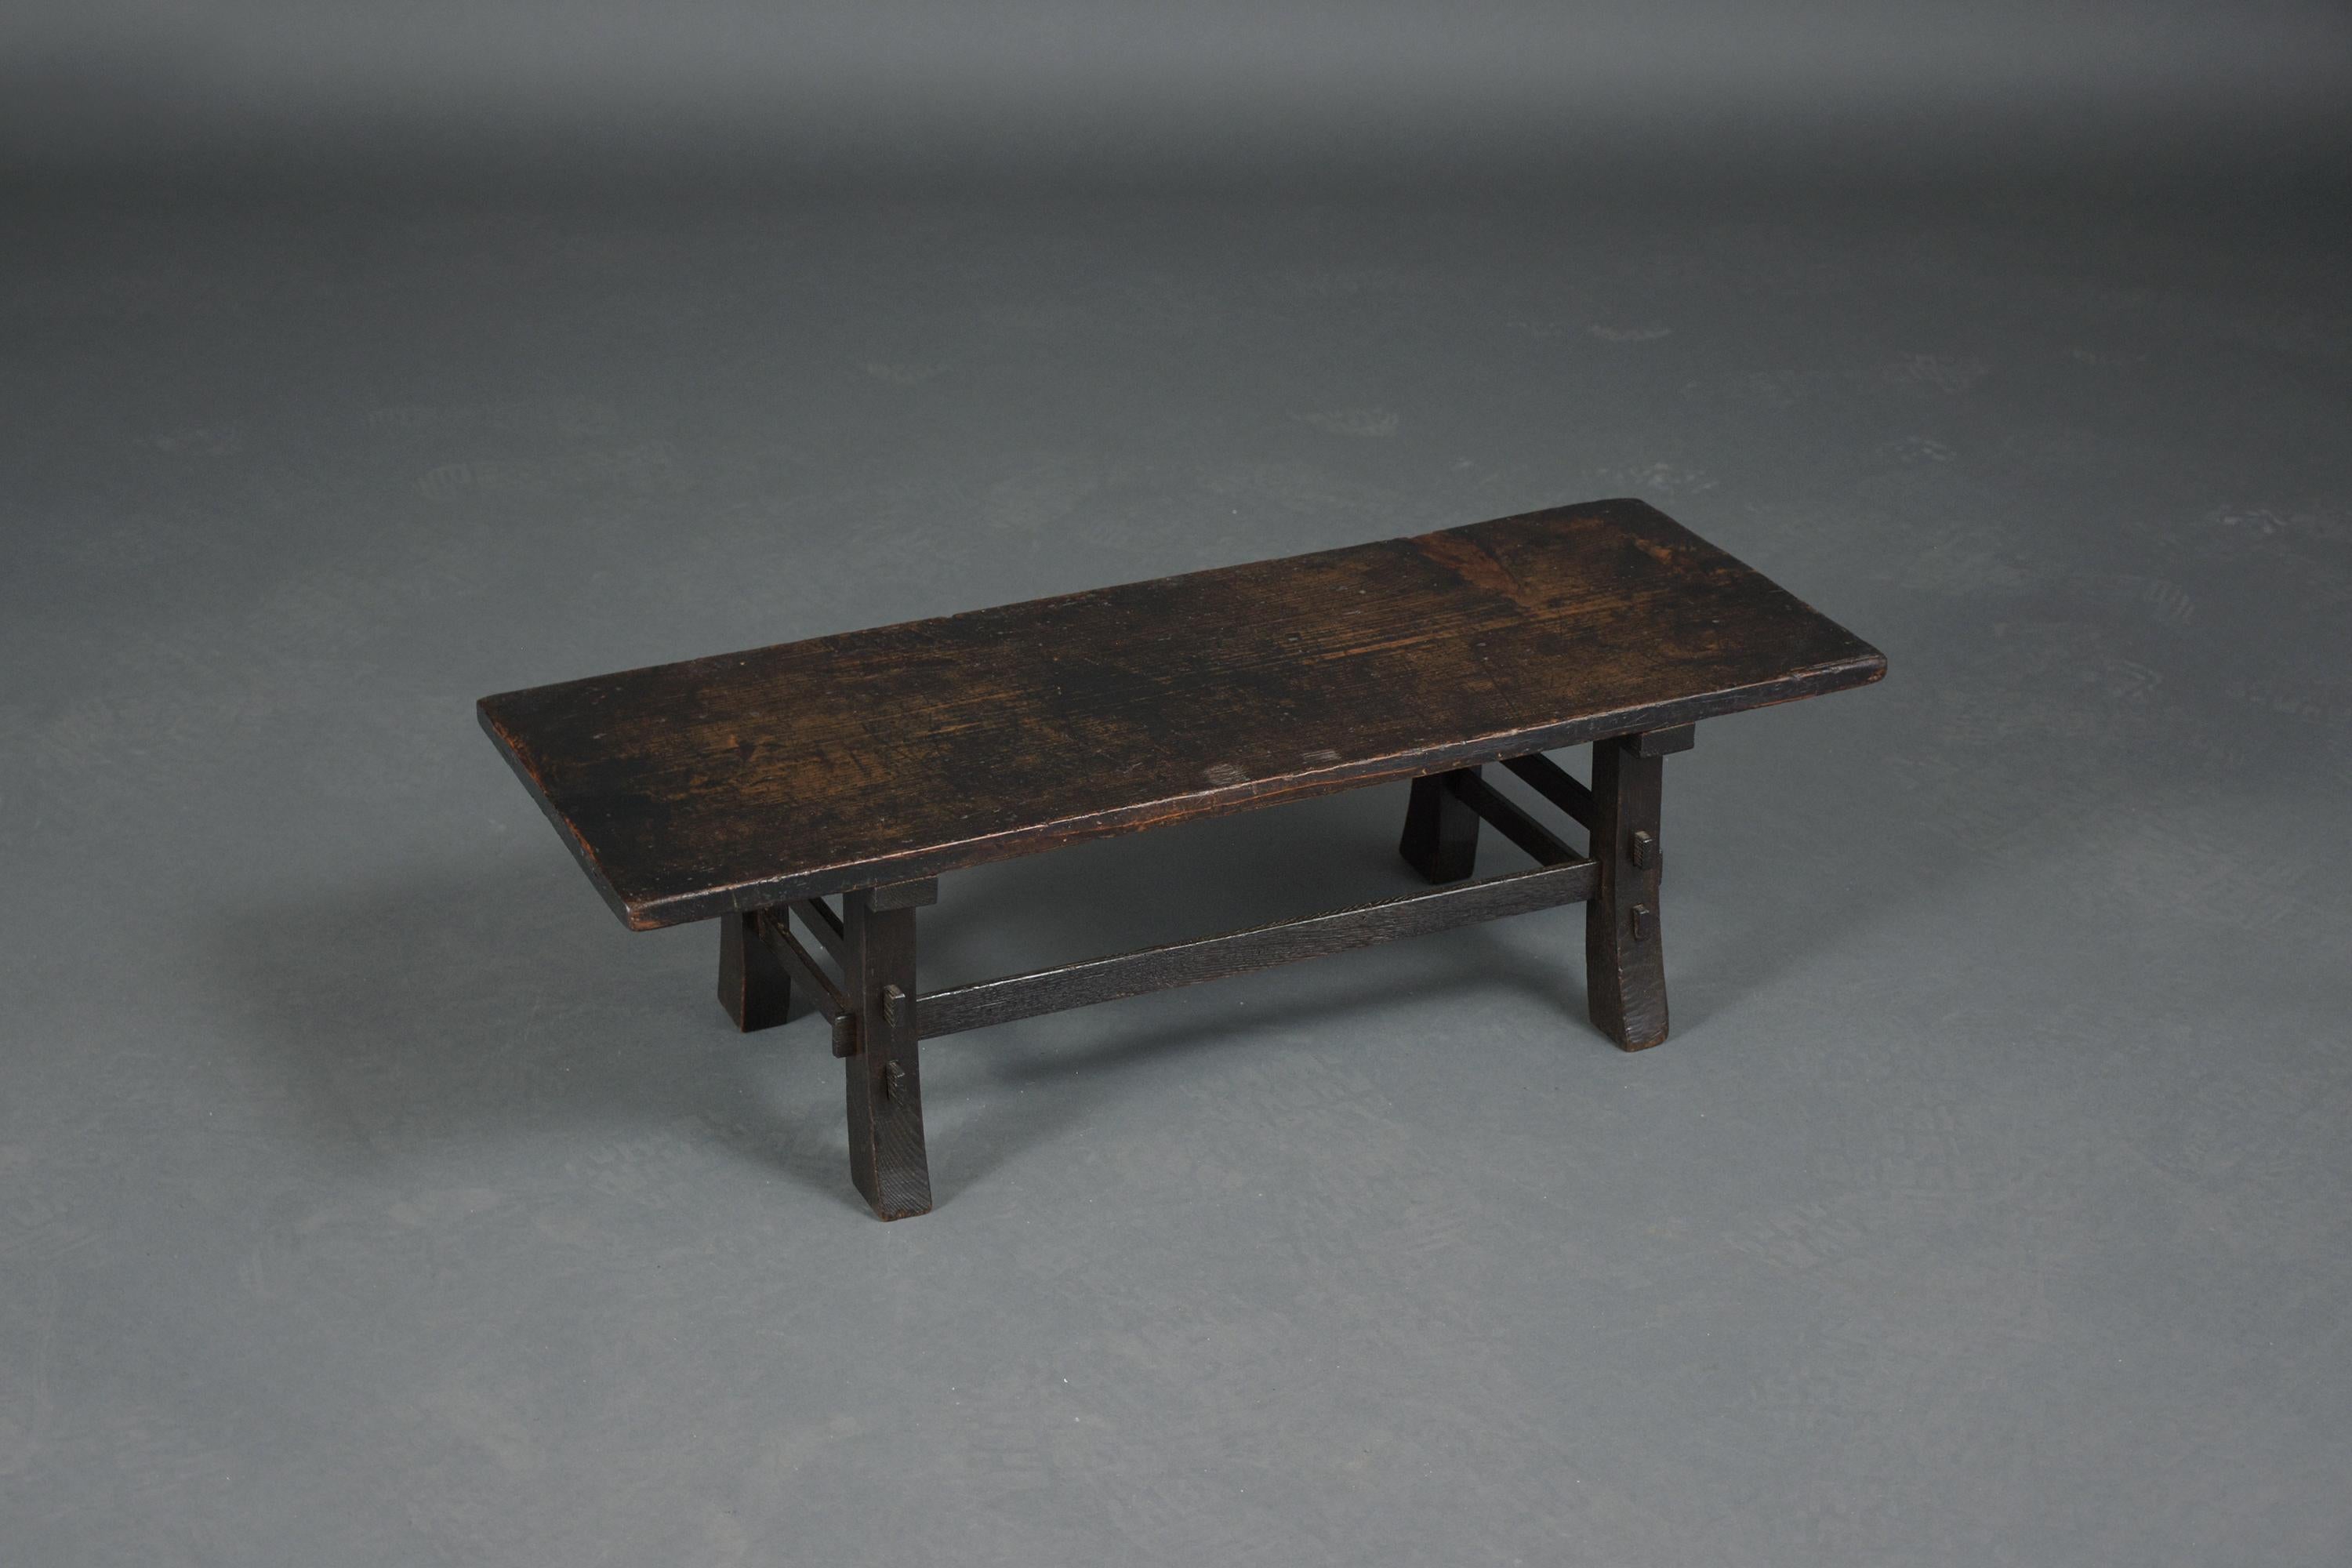 An extraordinary 19th-century Japanese low table beautifully crafted out of elmwood and has been professionally restored by our craftsmen. This fabulous piece features an original dark brown color newly waxed and polished developing a beautiful